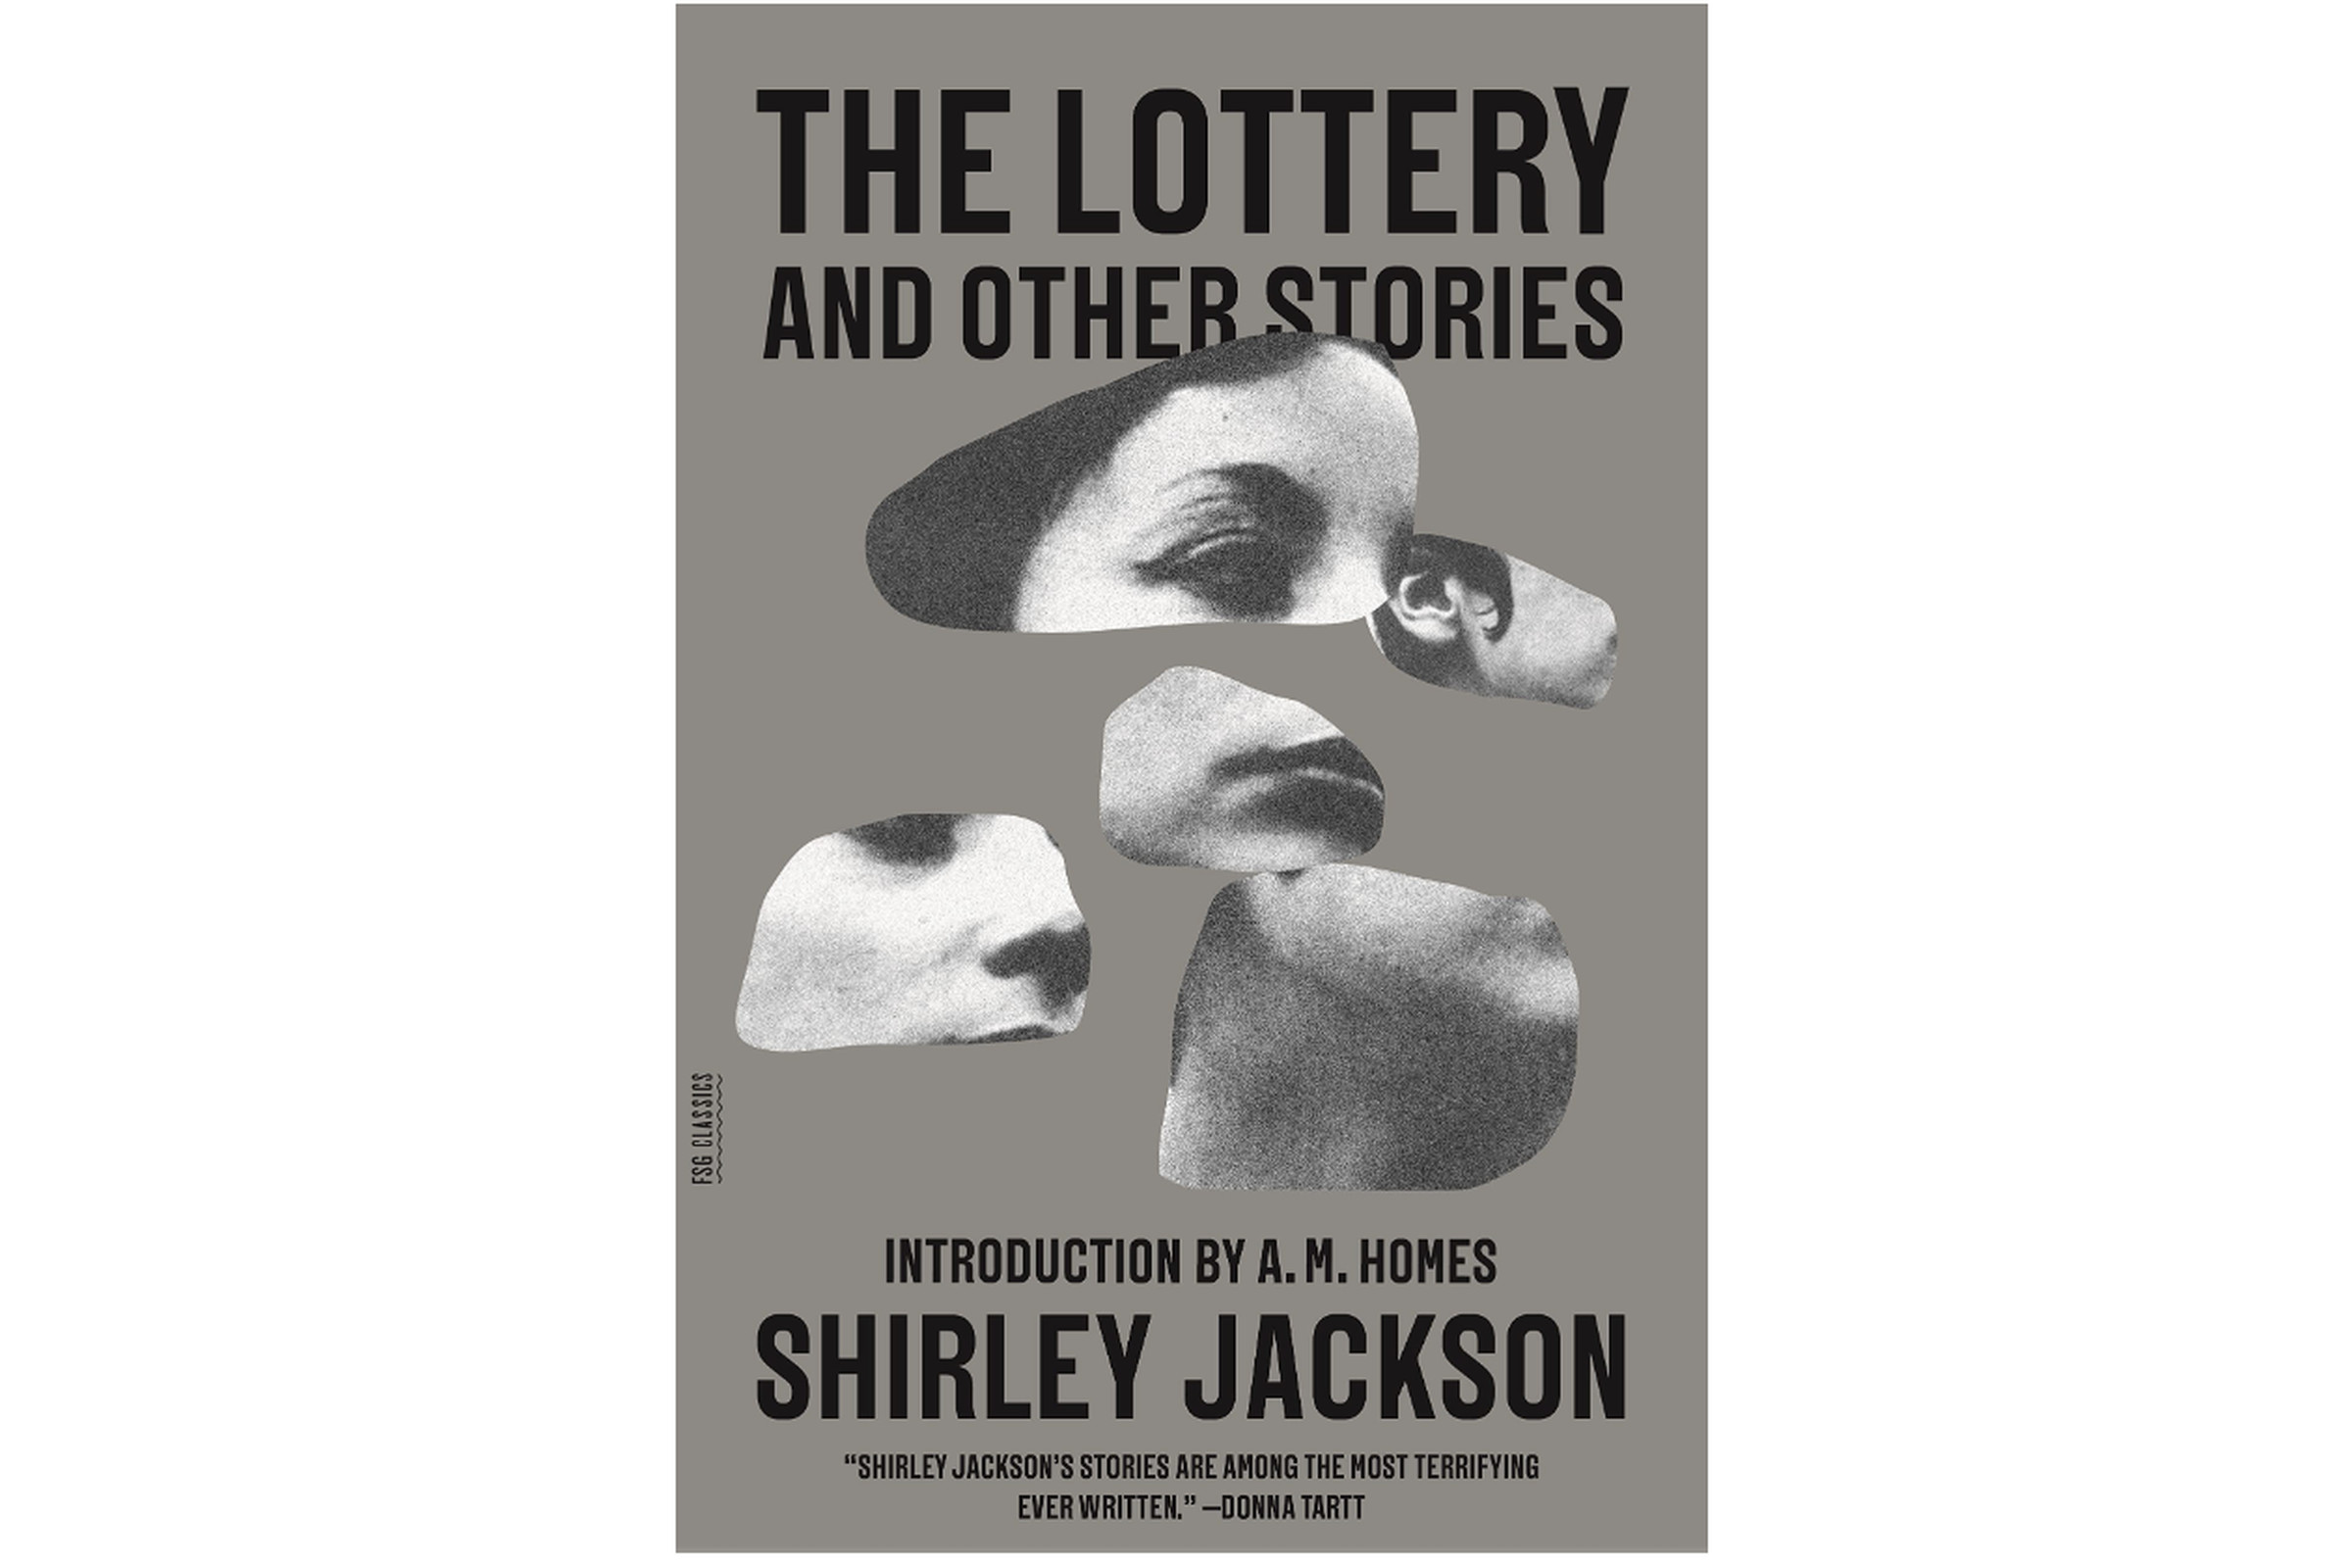 Book cover for The Lottery and other stories, showing a woman head in weird pieces